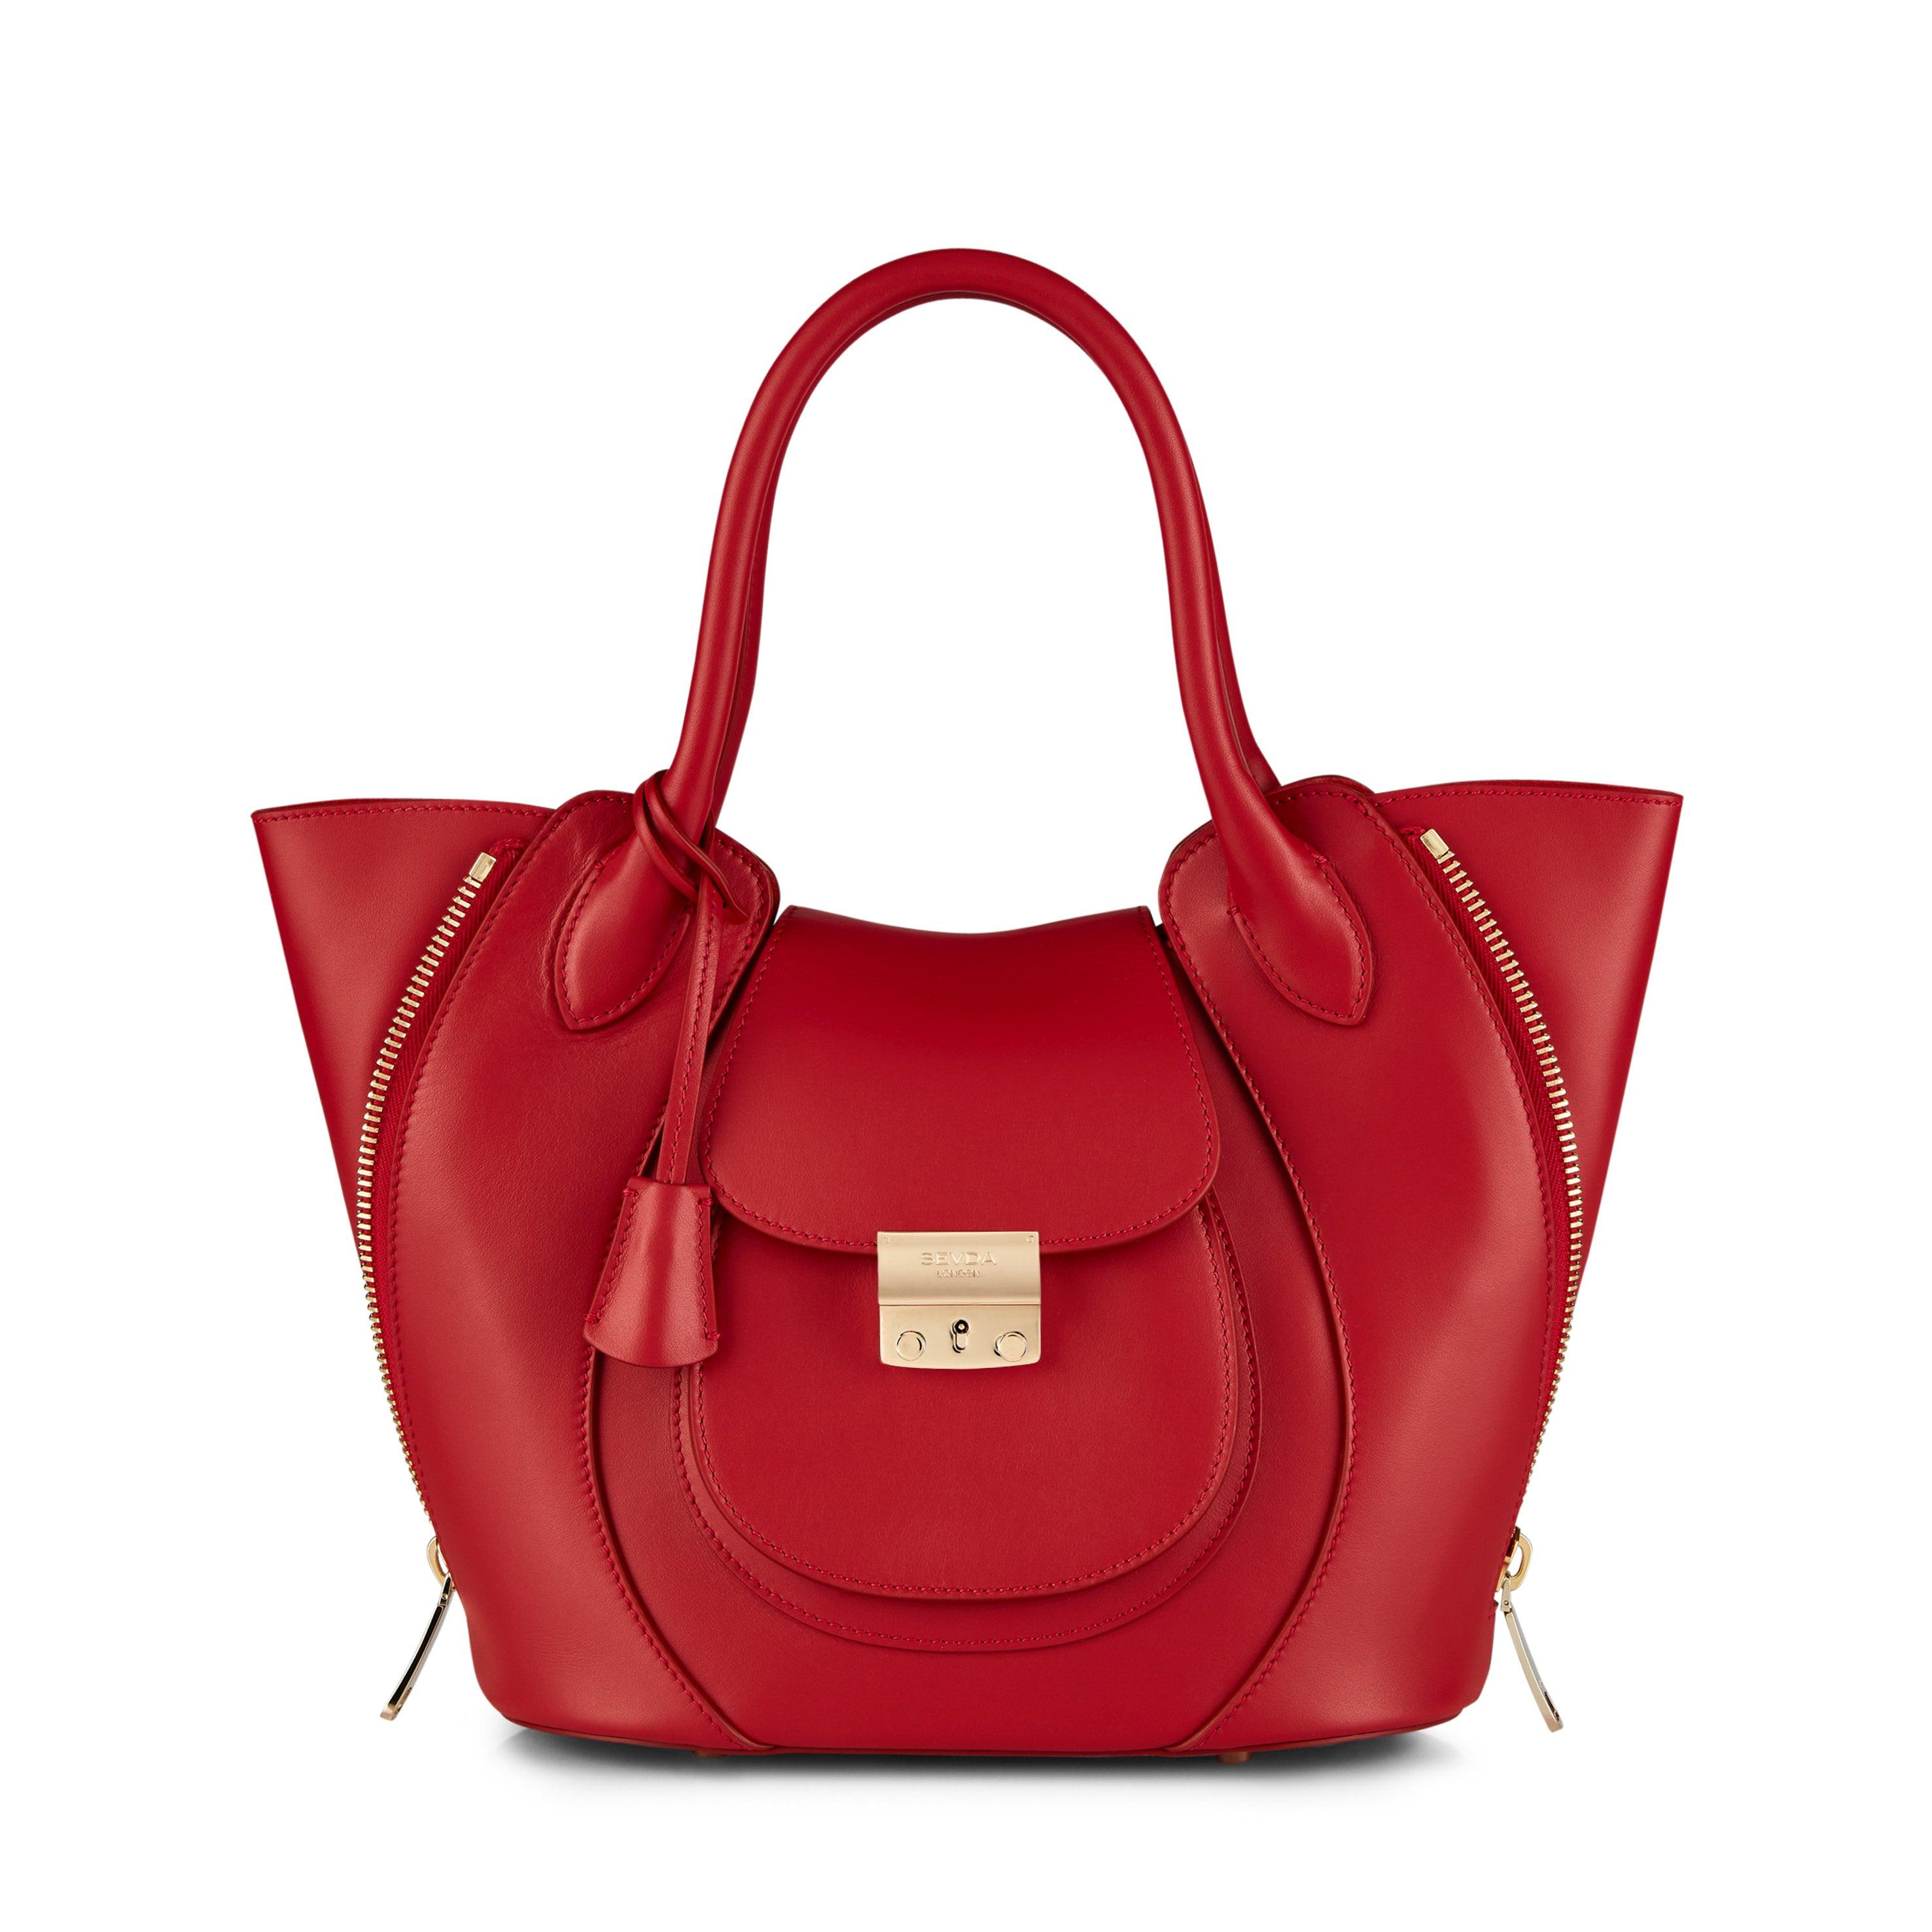 Red Luxury Designer Bag - Fusion of London's style and Italian craftsmanship.